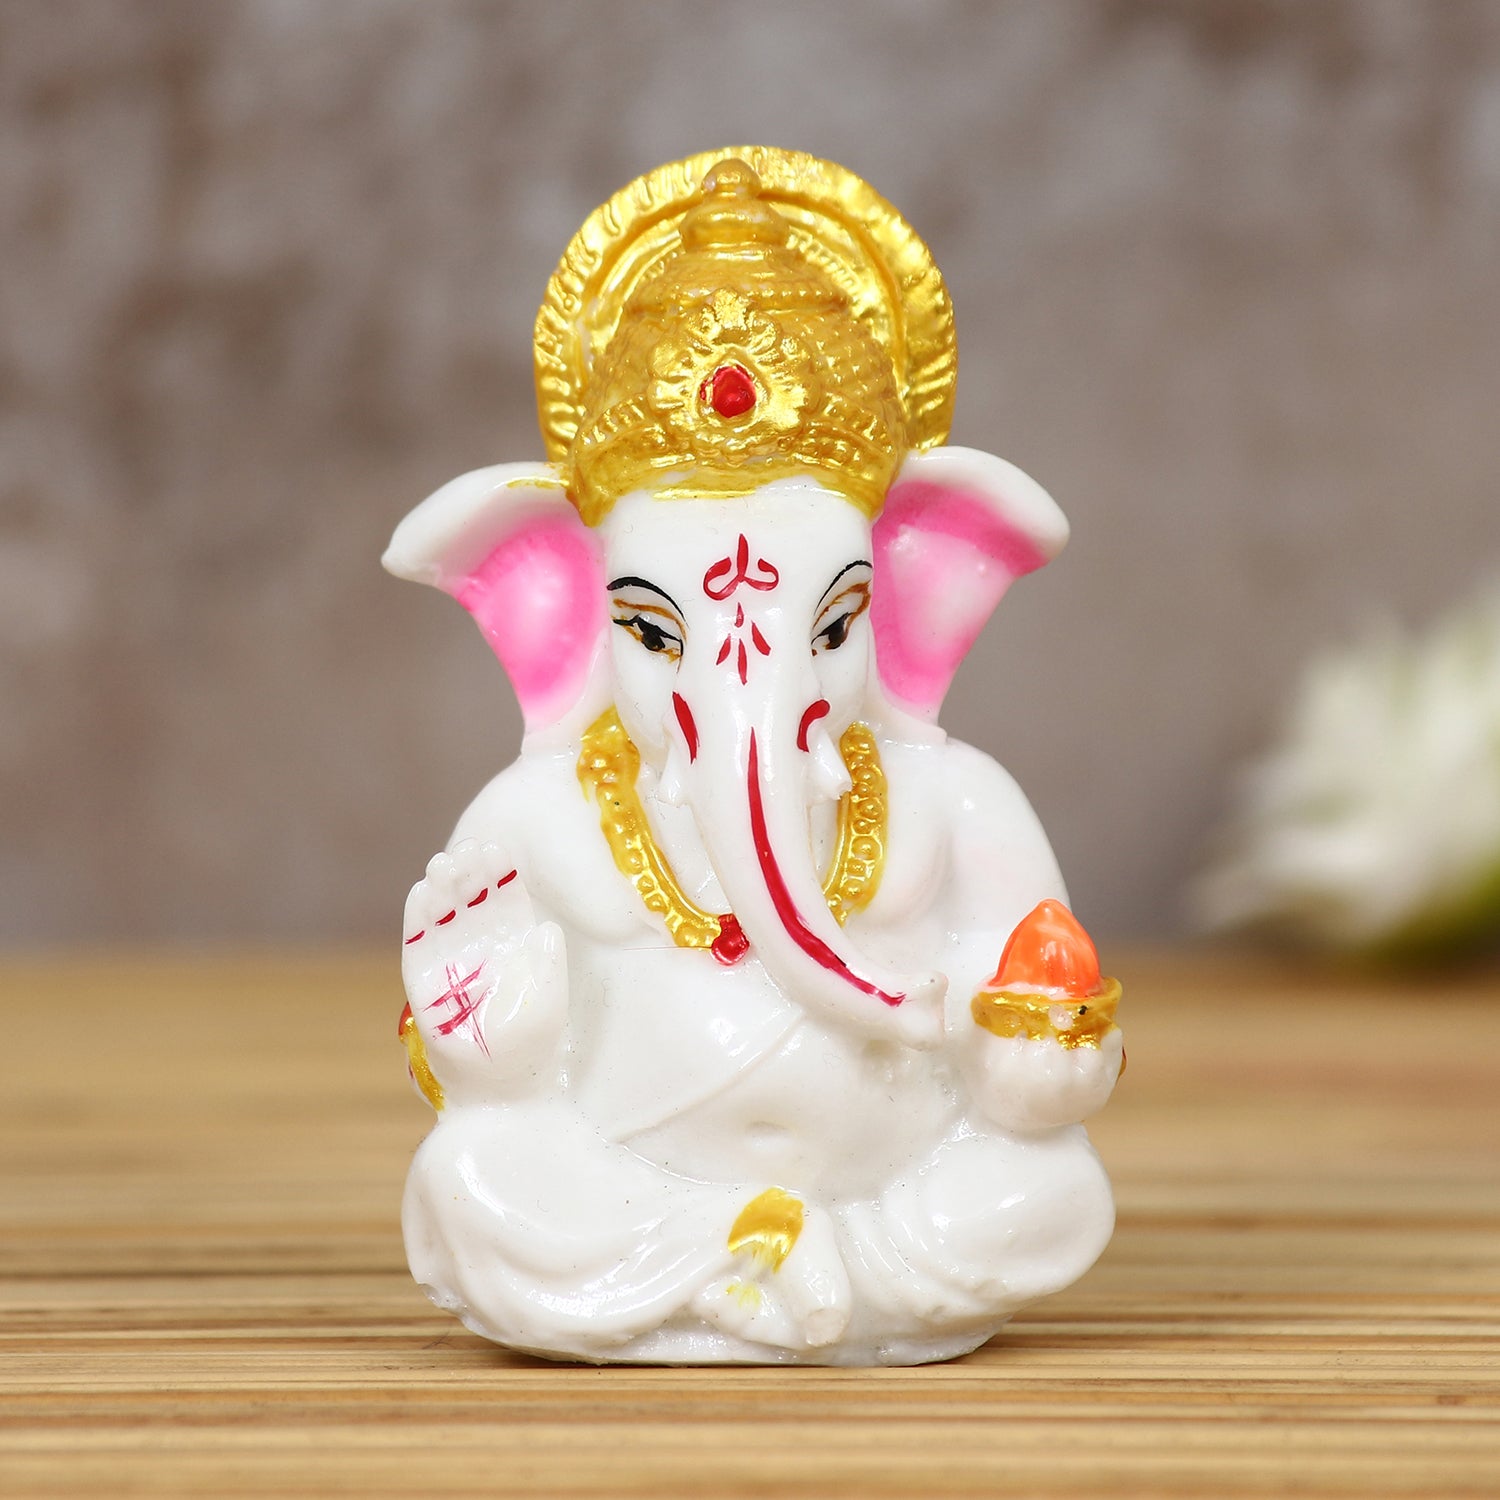 Decorative Lord Ganesha Idol for Car Dashboard, Home Temple and Office Desks 1